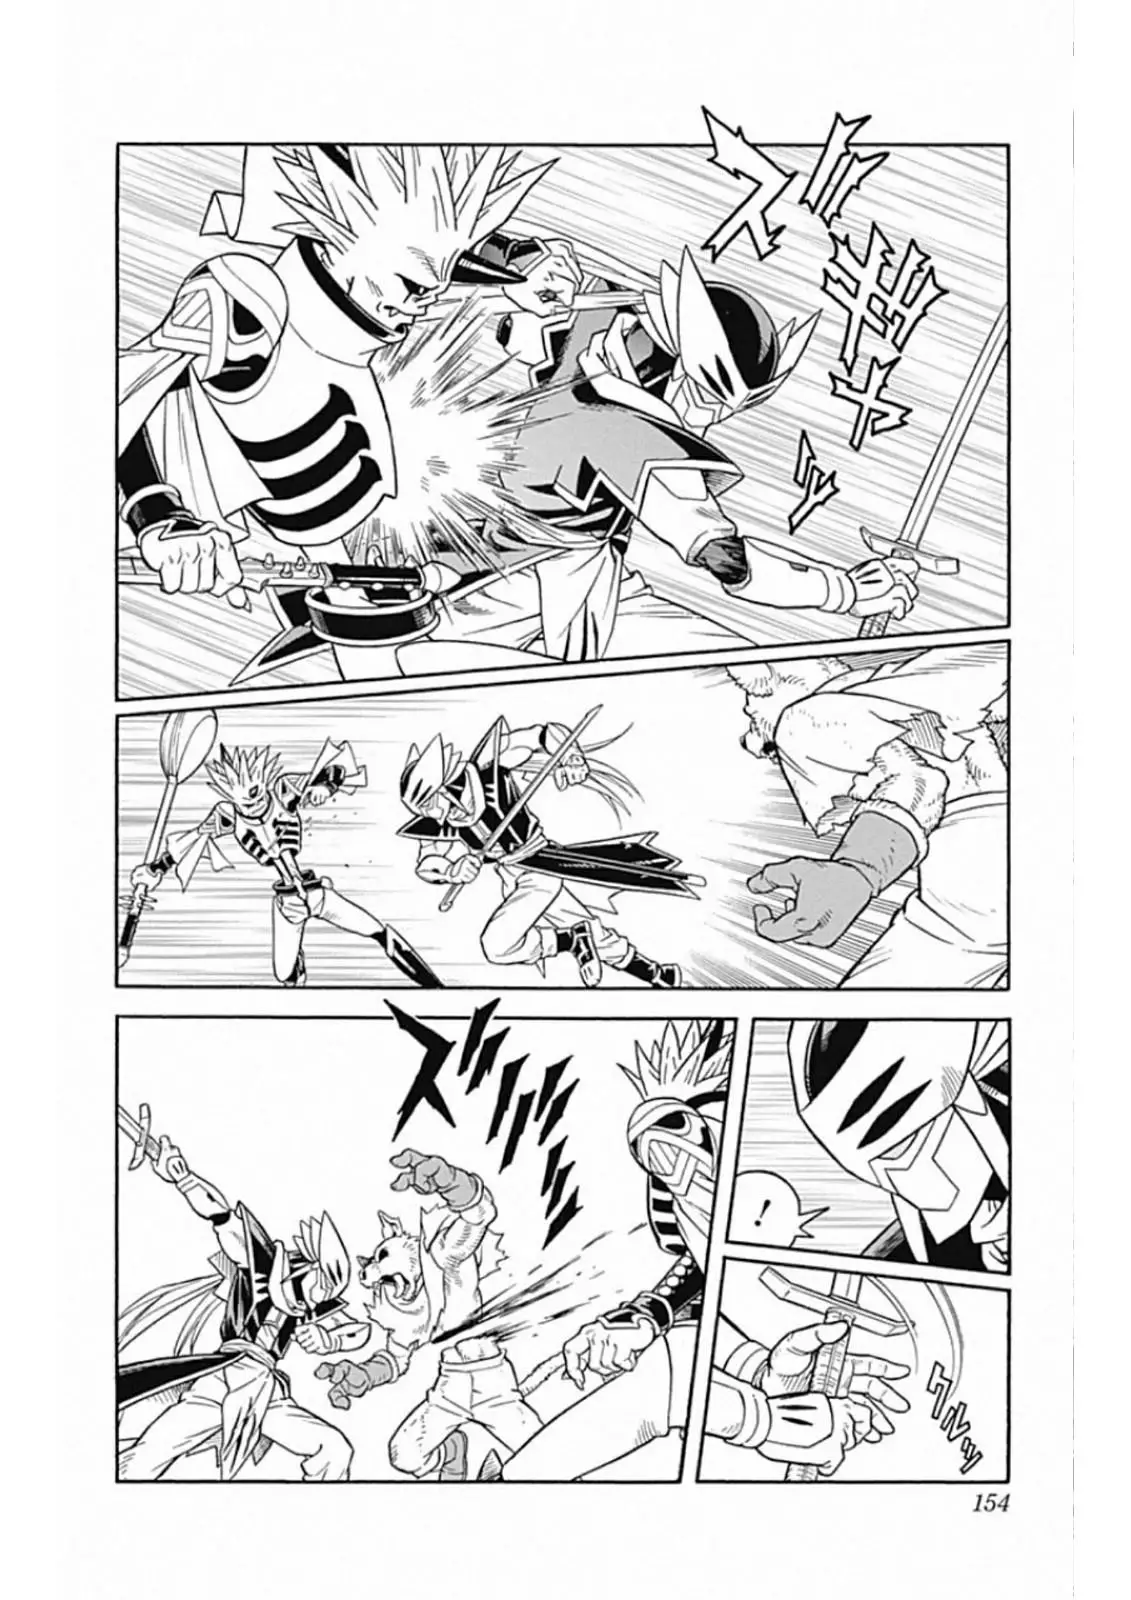 Beet The Vandel Buster - 66 page 20-9c40d8e8